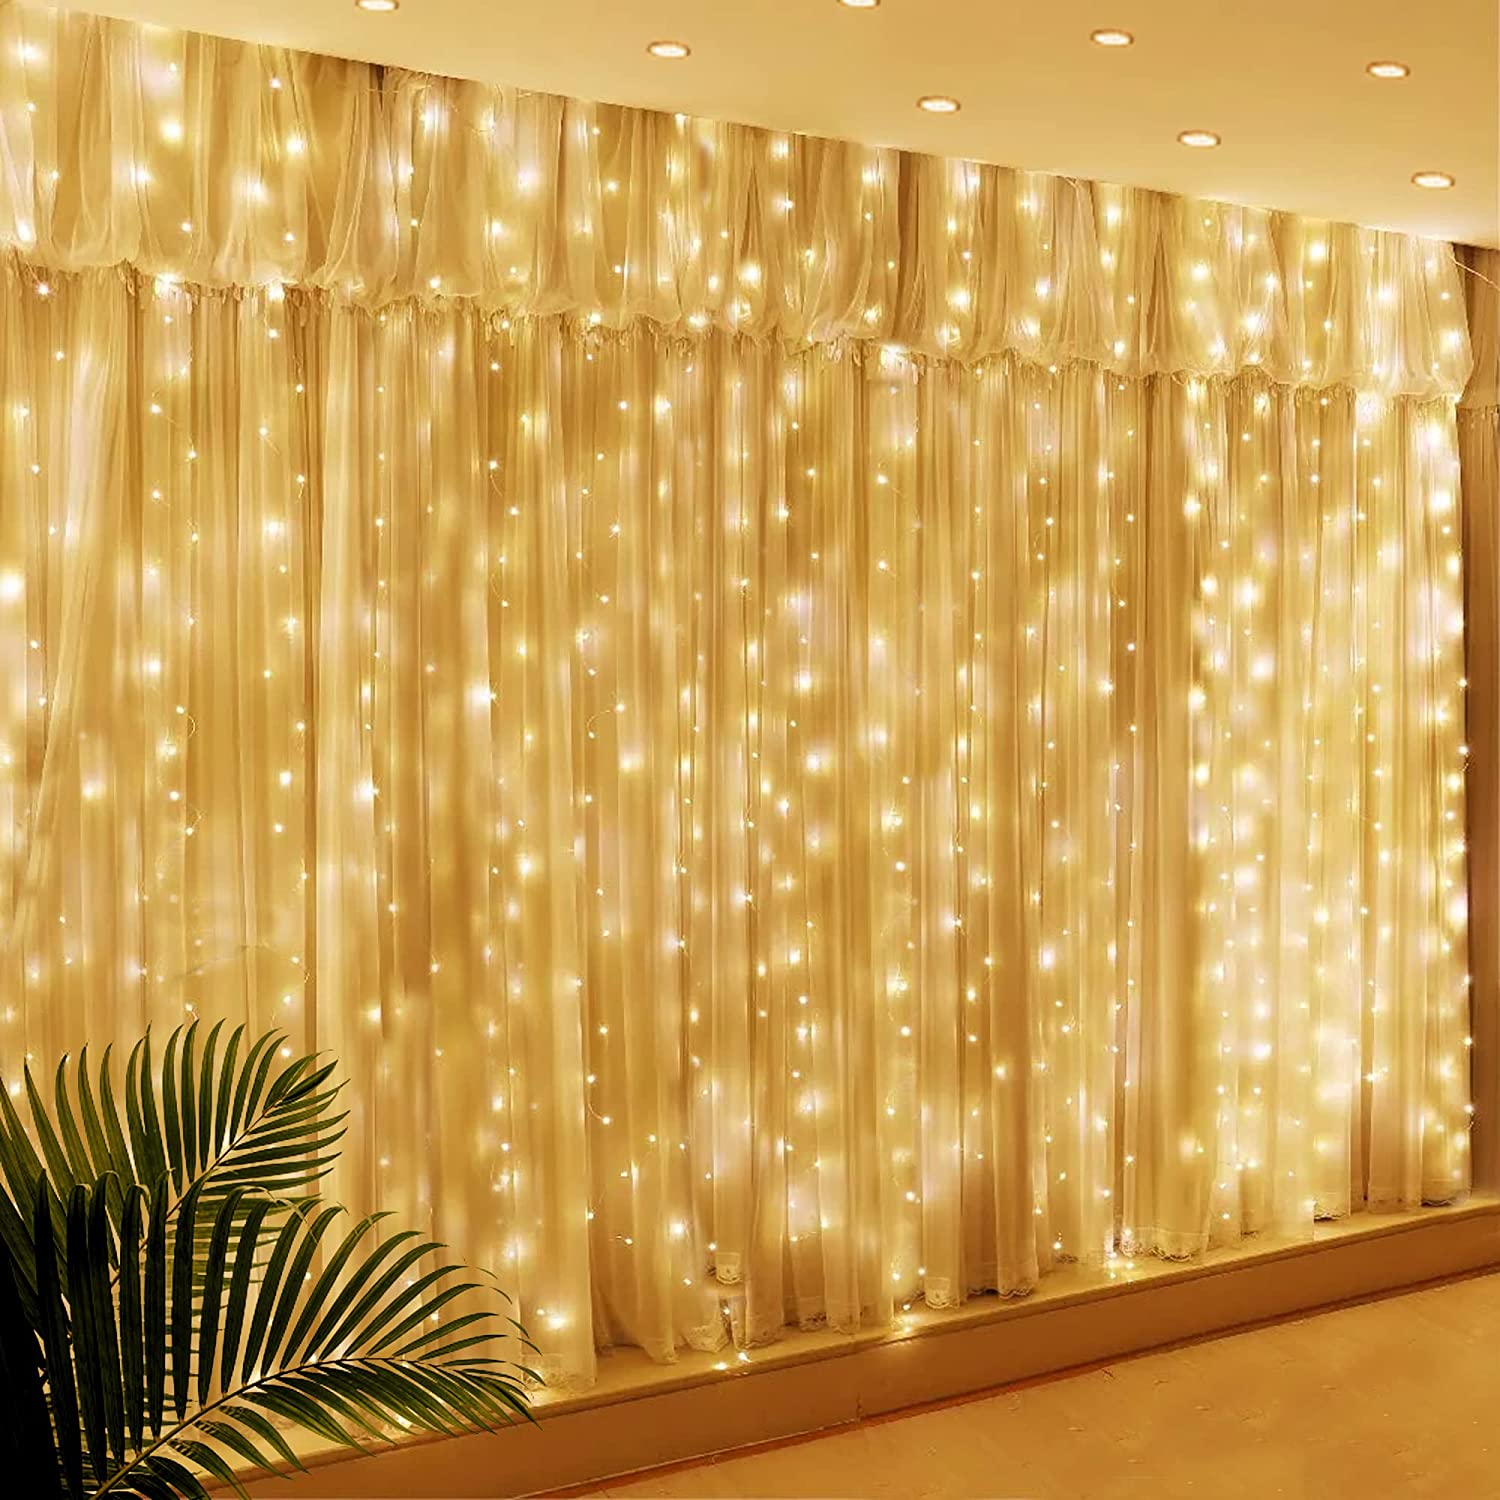 Glimmer Lightings Curtain Lights For Diwali Birthday Wedding Party in Home Decoration